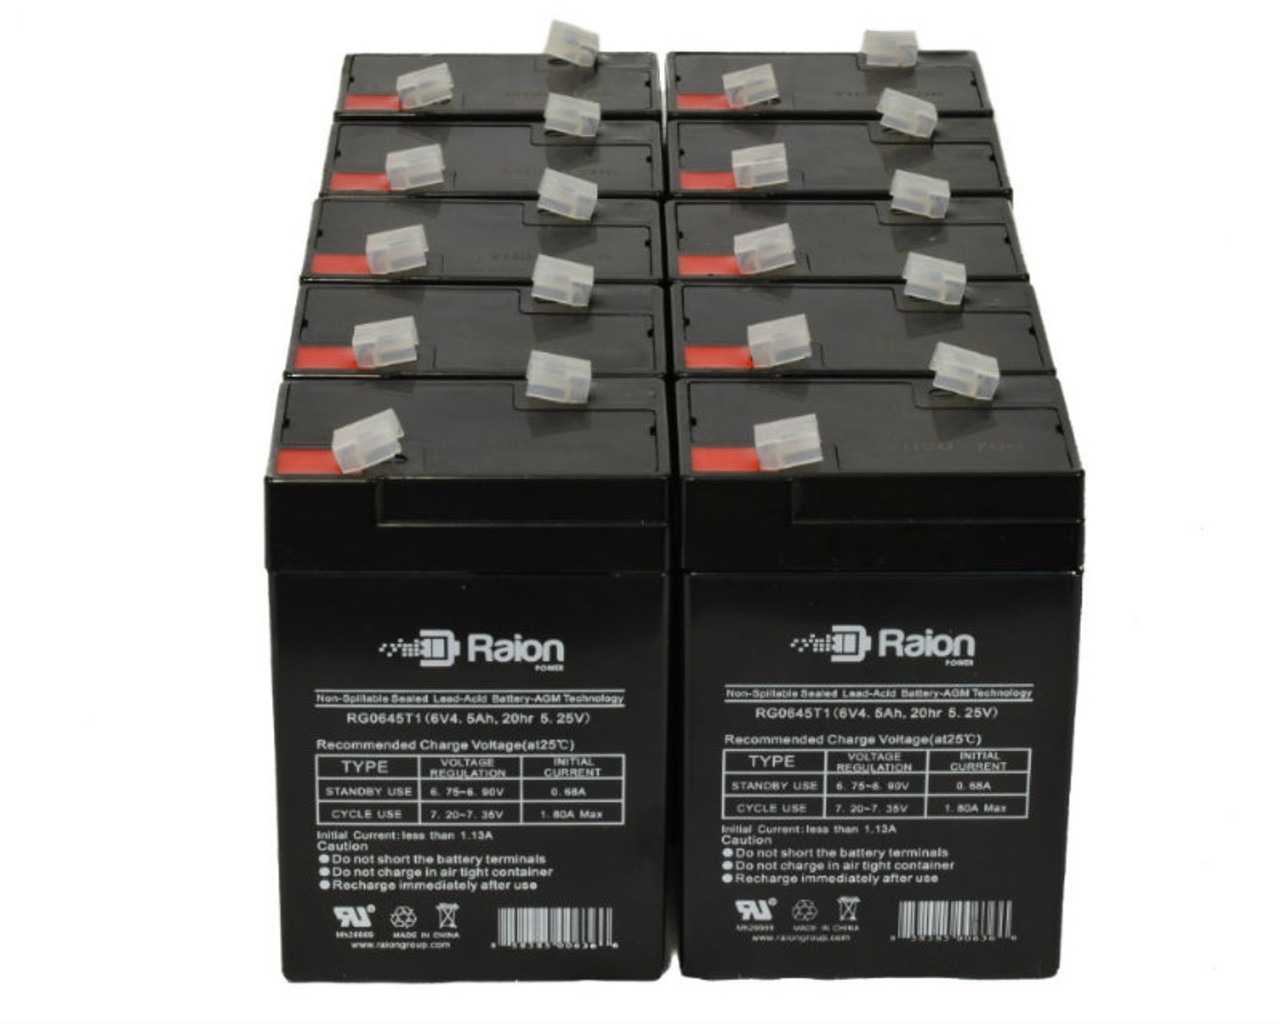 Raion Power 6 Volt 4.5Ah RG0645T1 Replacement Battery for Taico TP6-4.5 - 10 Pack